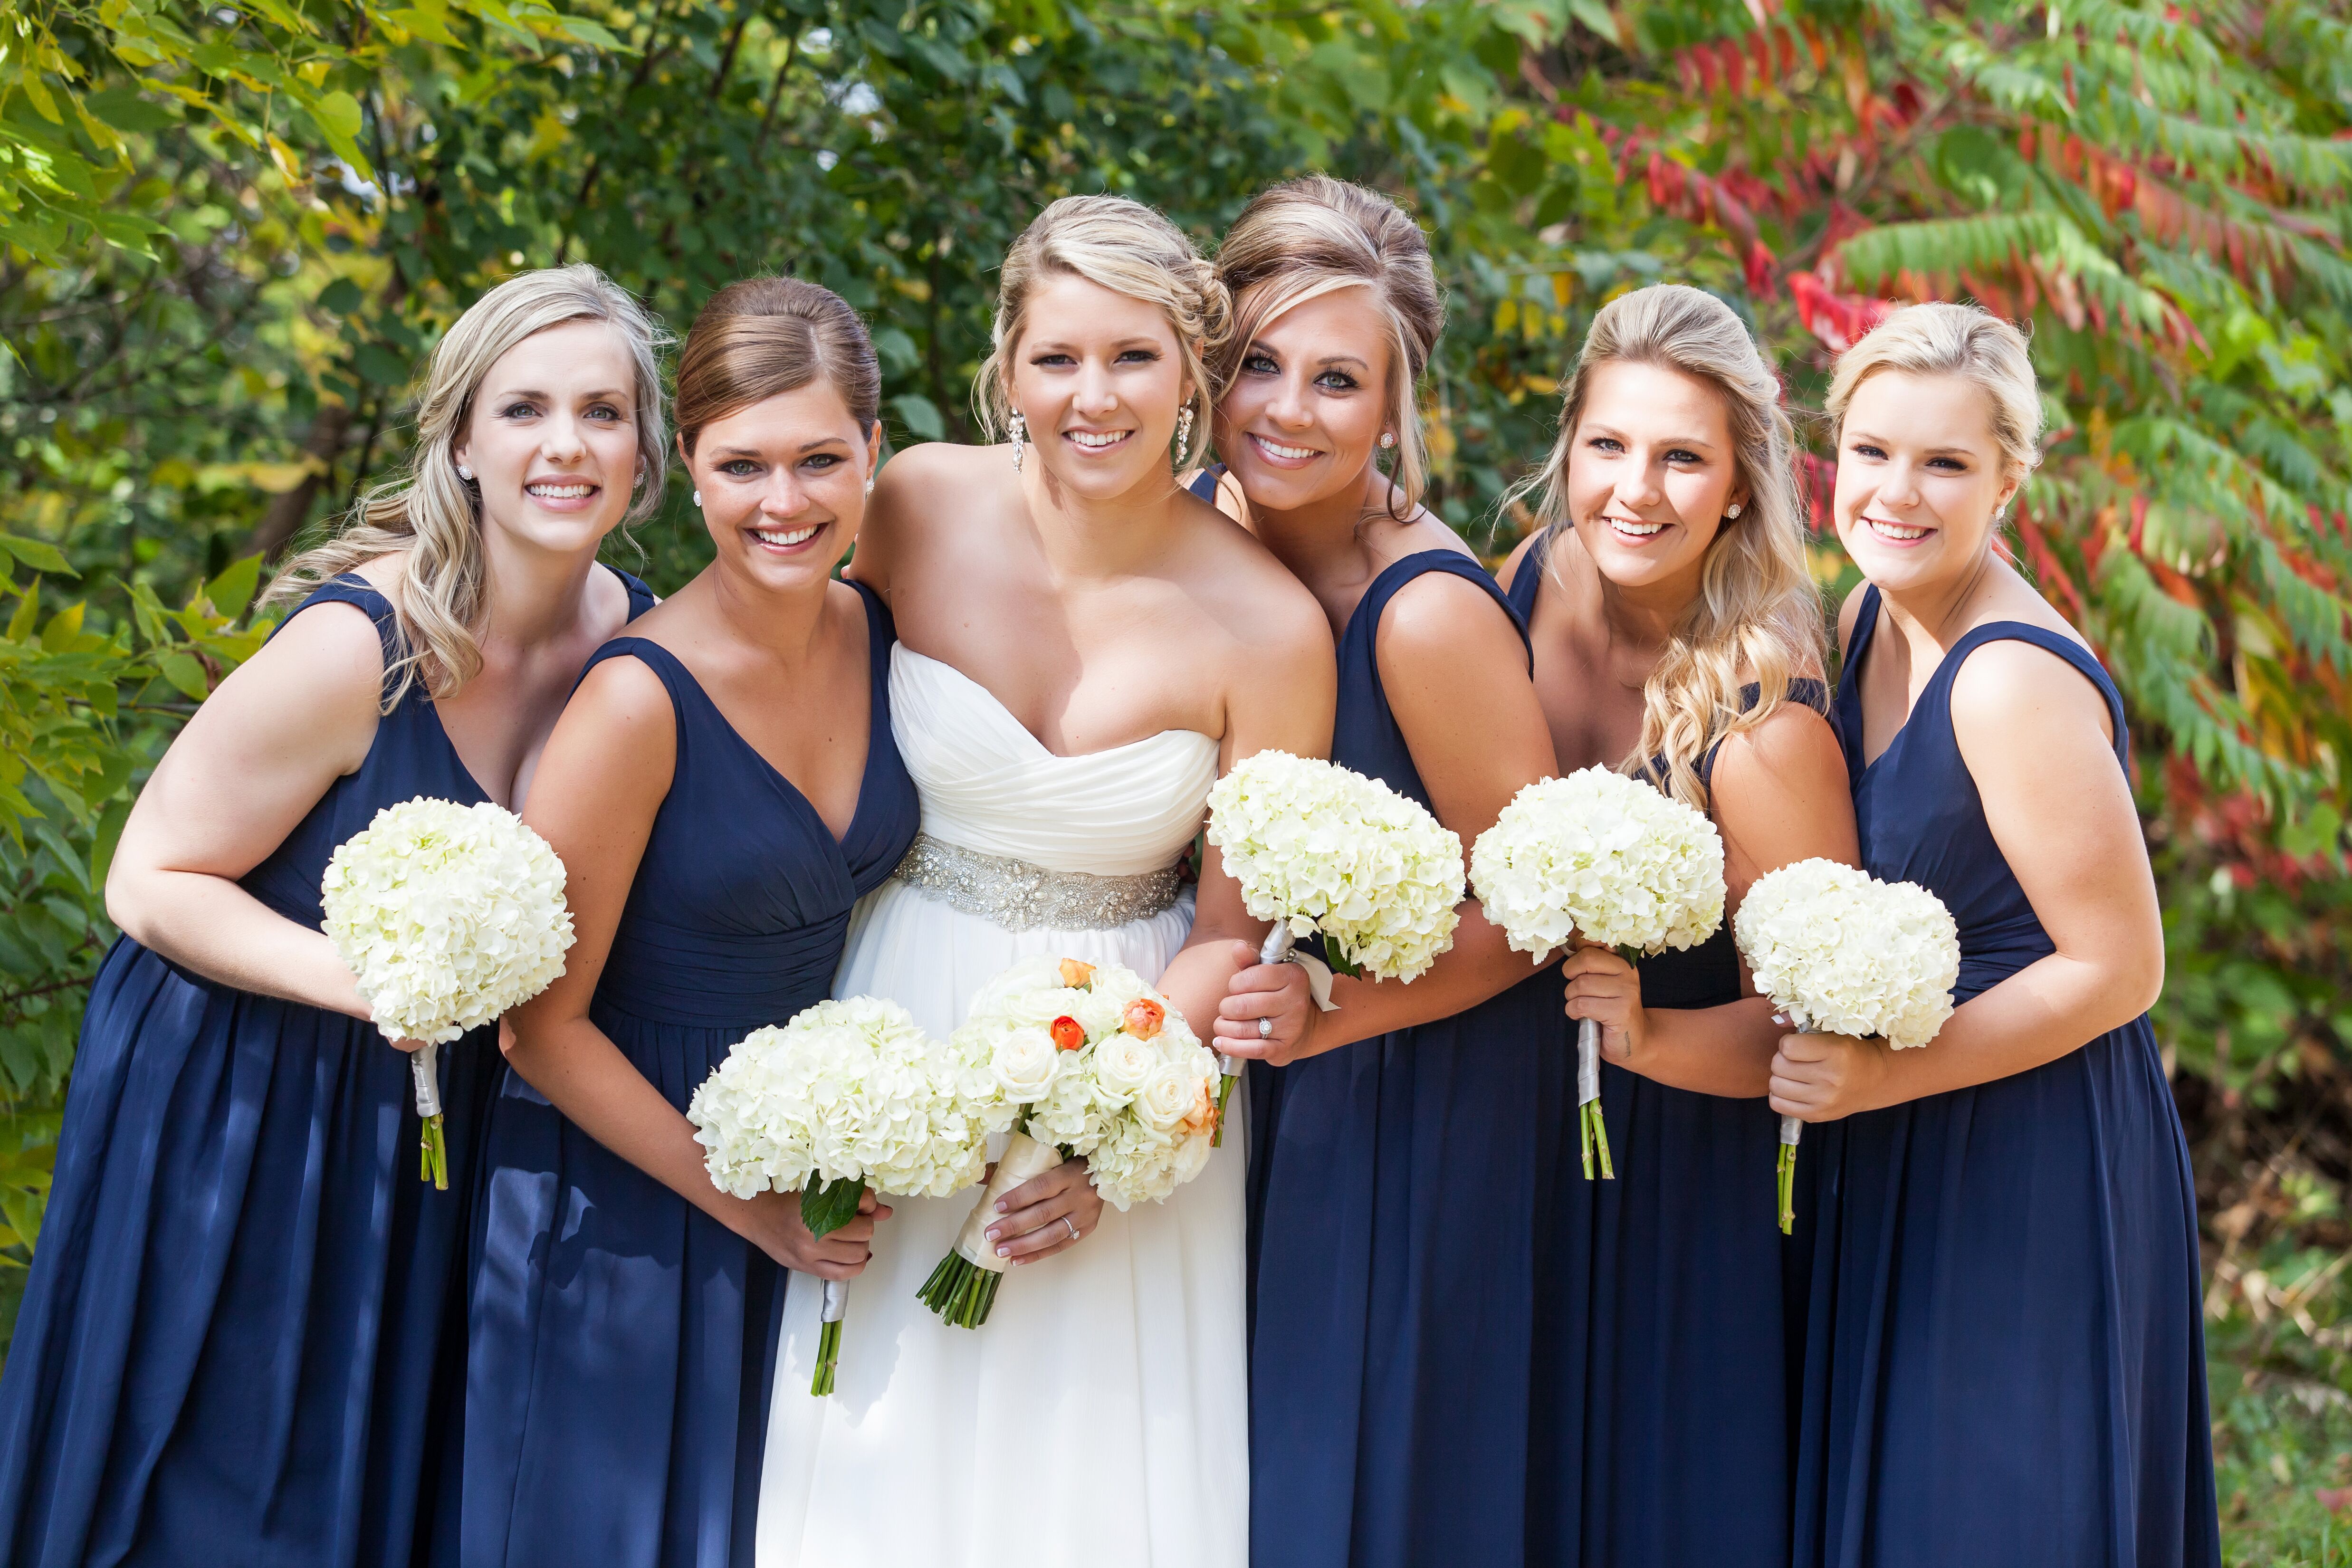 Long, Navy, V-Neck Bridesmaid Dresses with White Hydrangea Bouquets